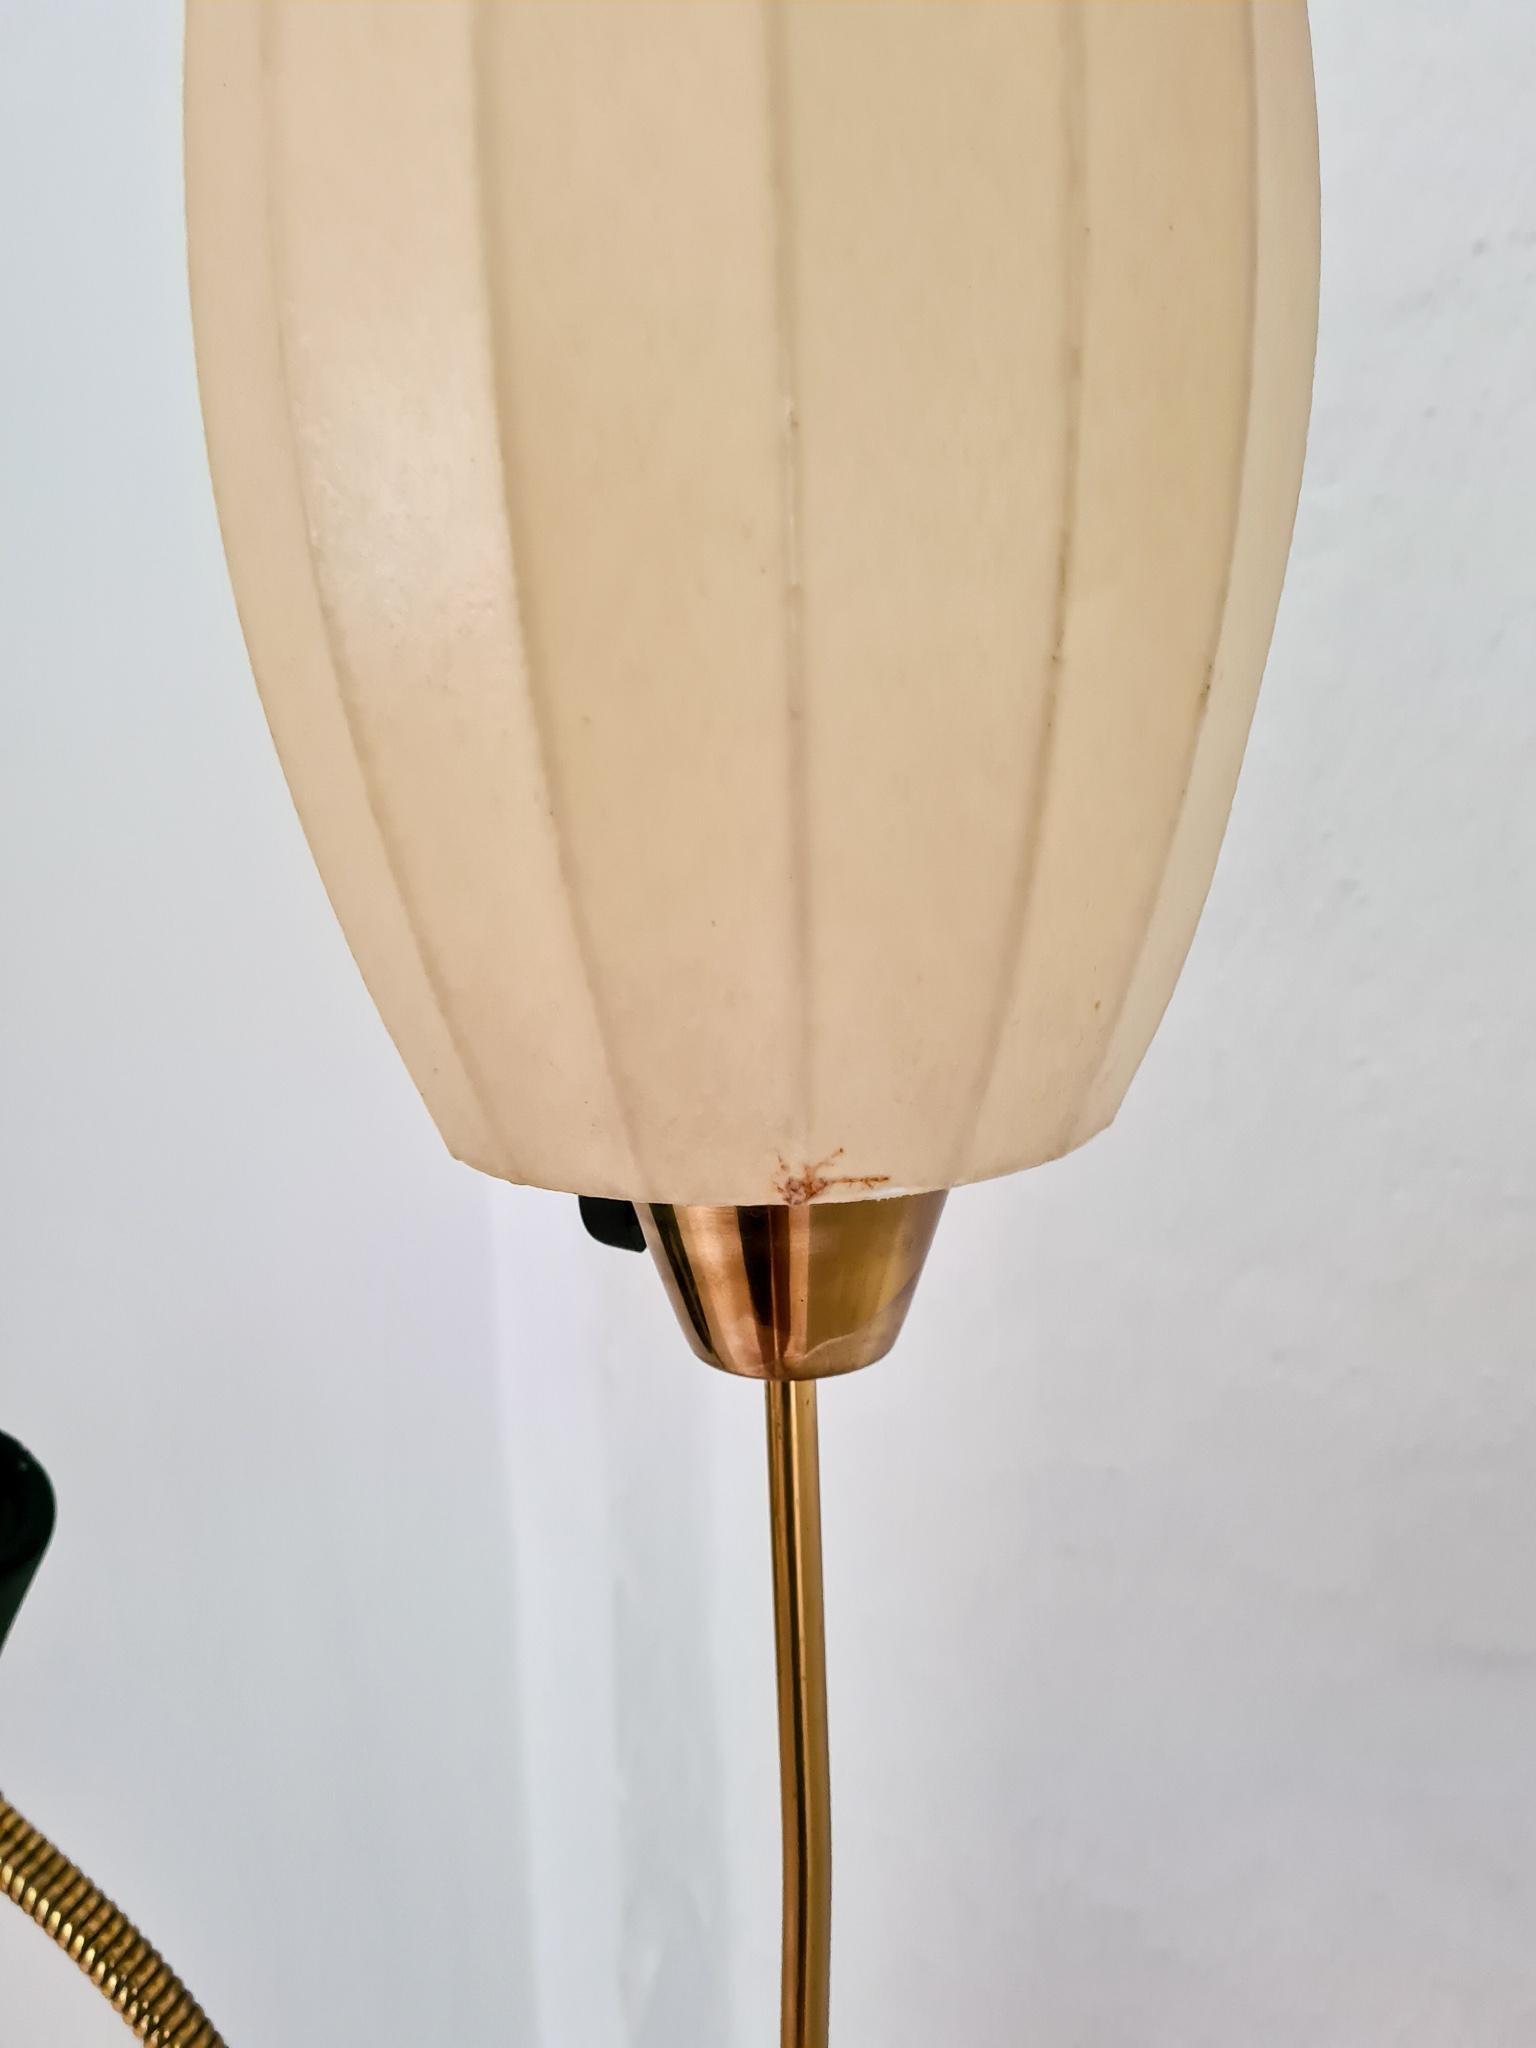 Midcentury Floor Lamp Attributed to Hans Bergström for Ateljé Lyktan For Sale 5